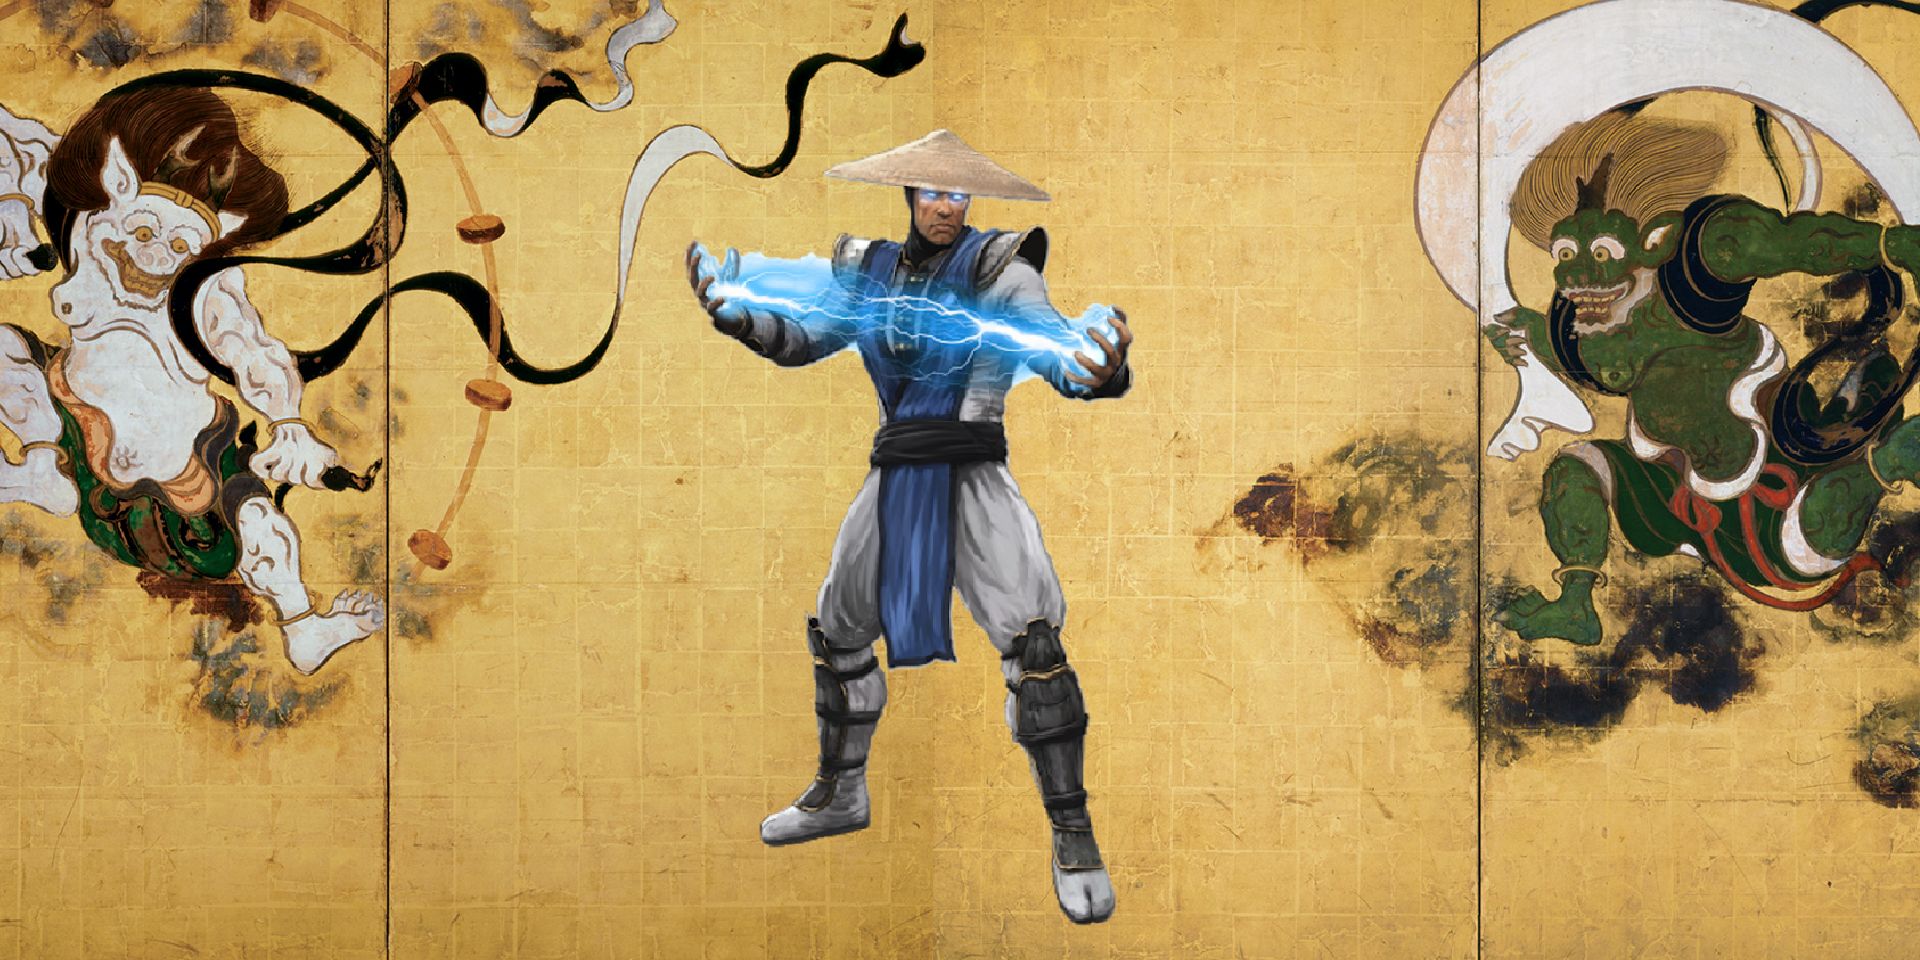 raiden next to the japanese gods who inspired his name and origin.